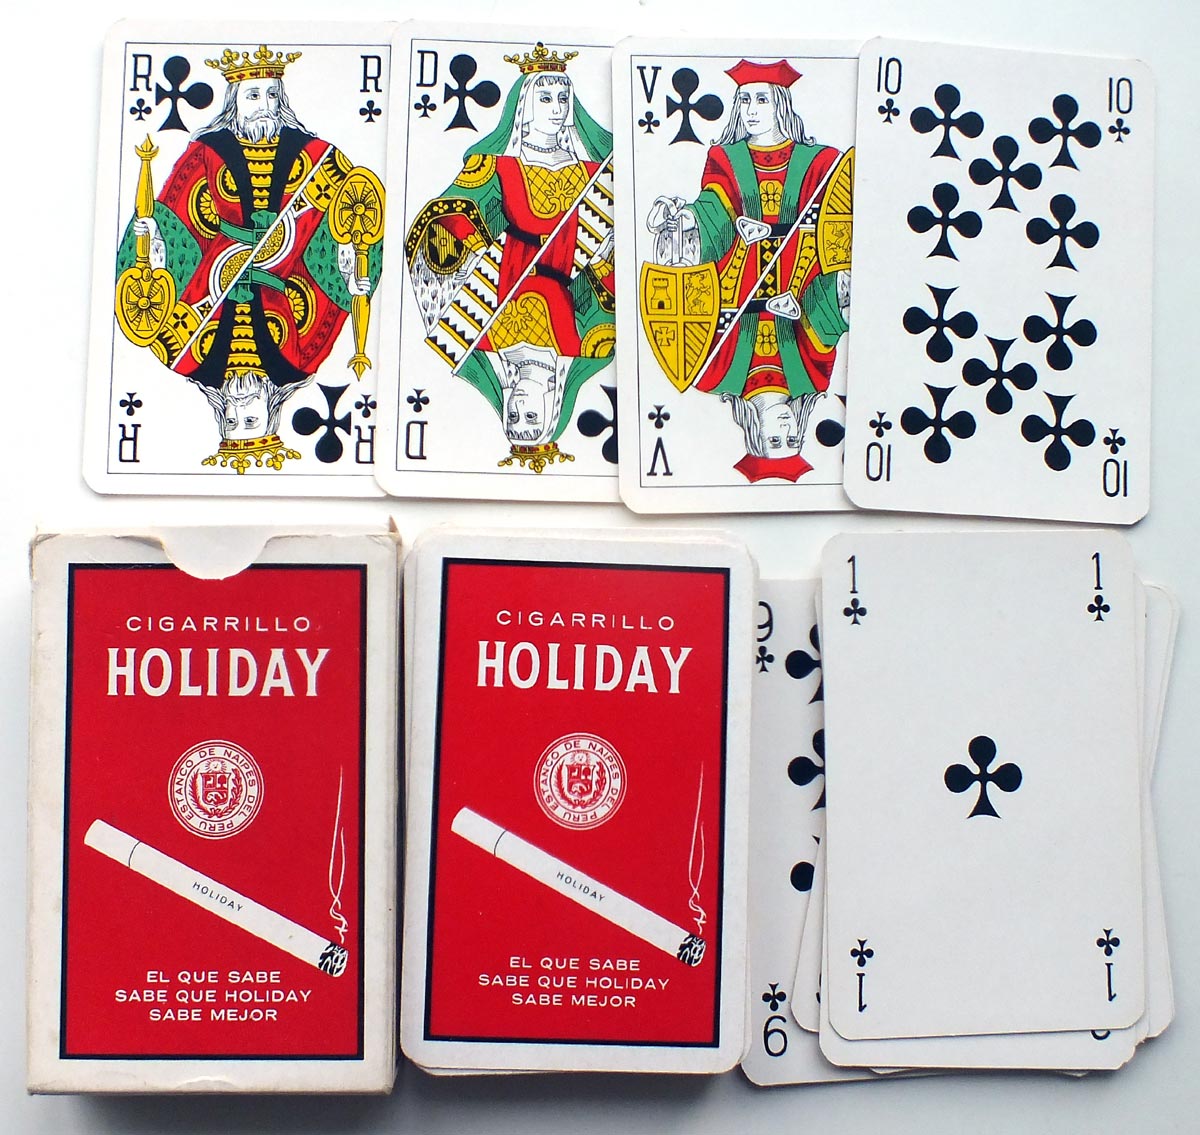 Playing cards manufactured by Biermans for the Estanco de Naipes del Peru, c.1965